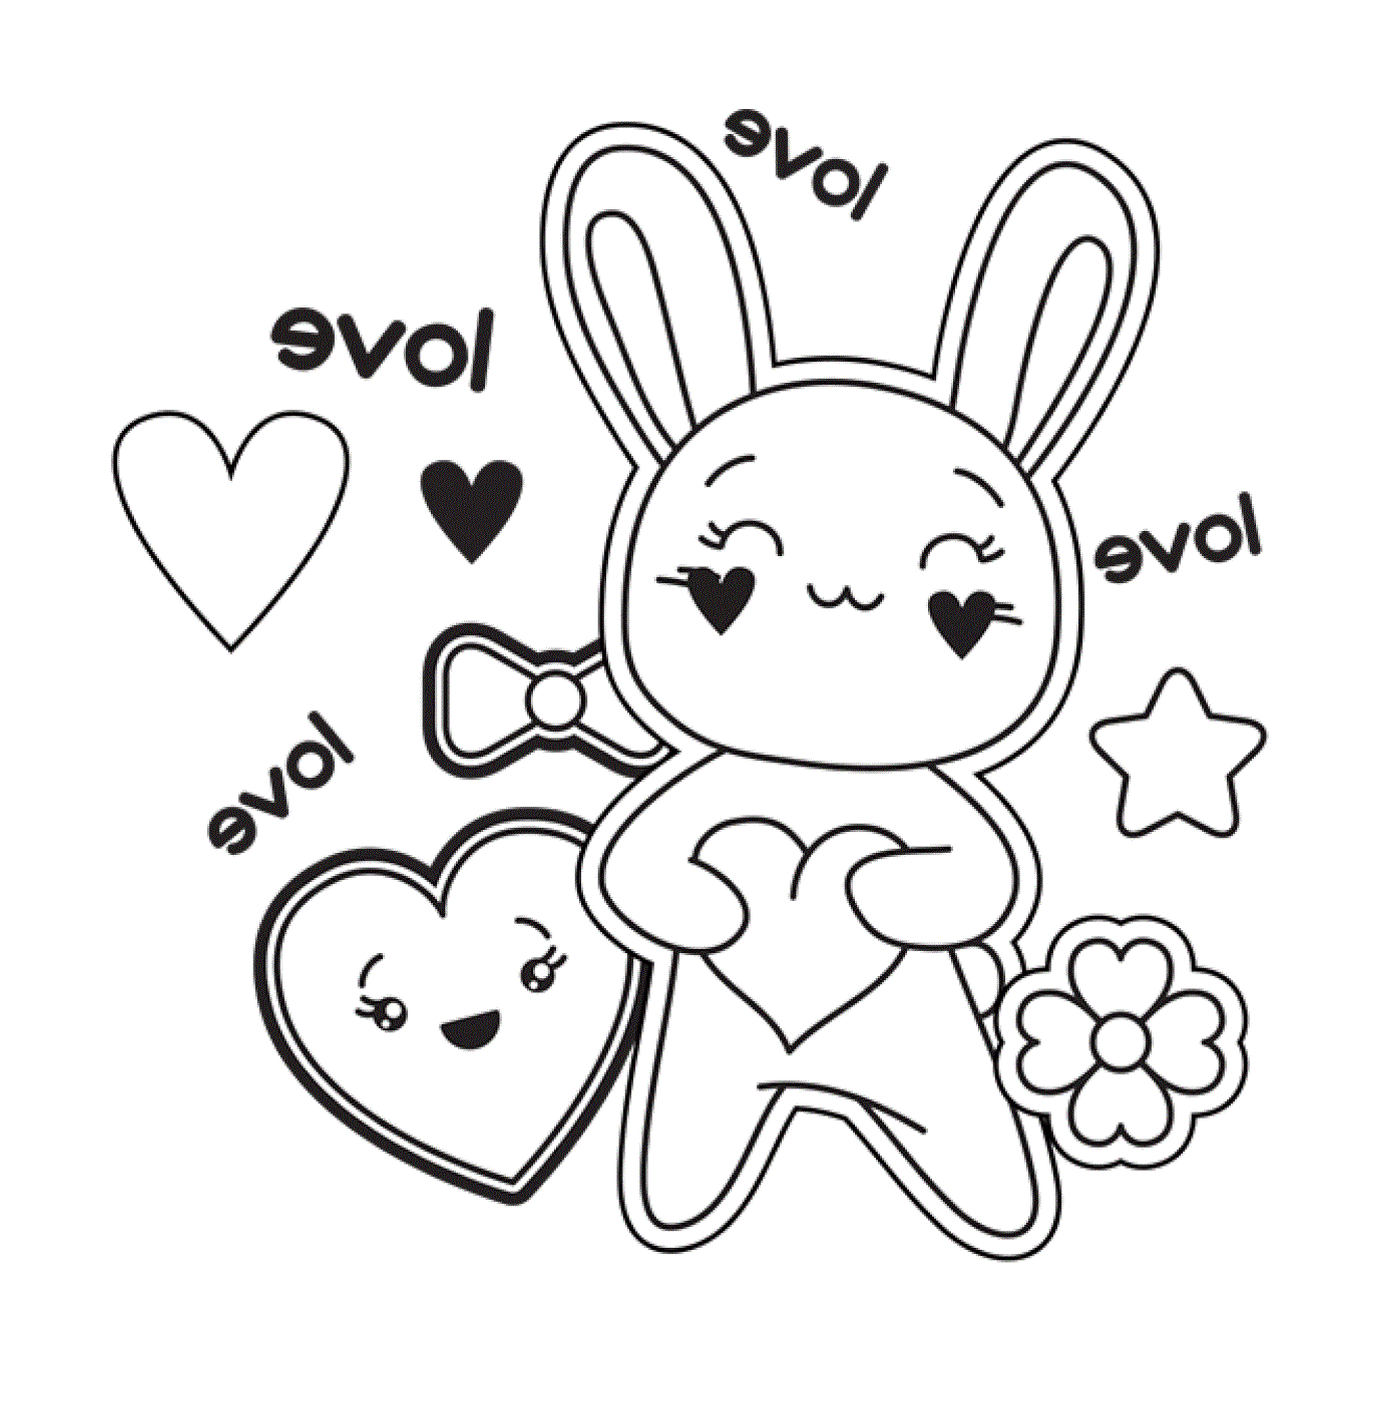  Rabbit in love with hearts 